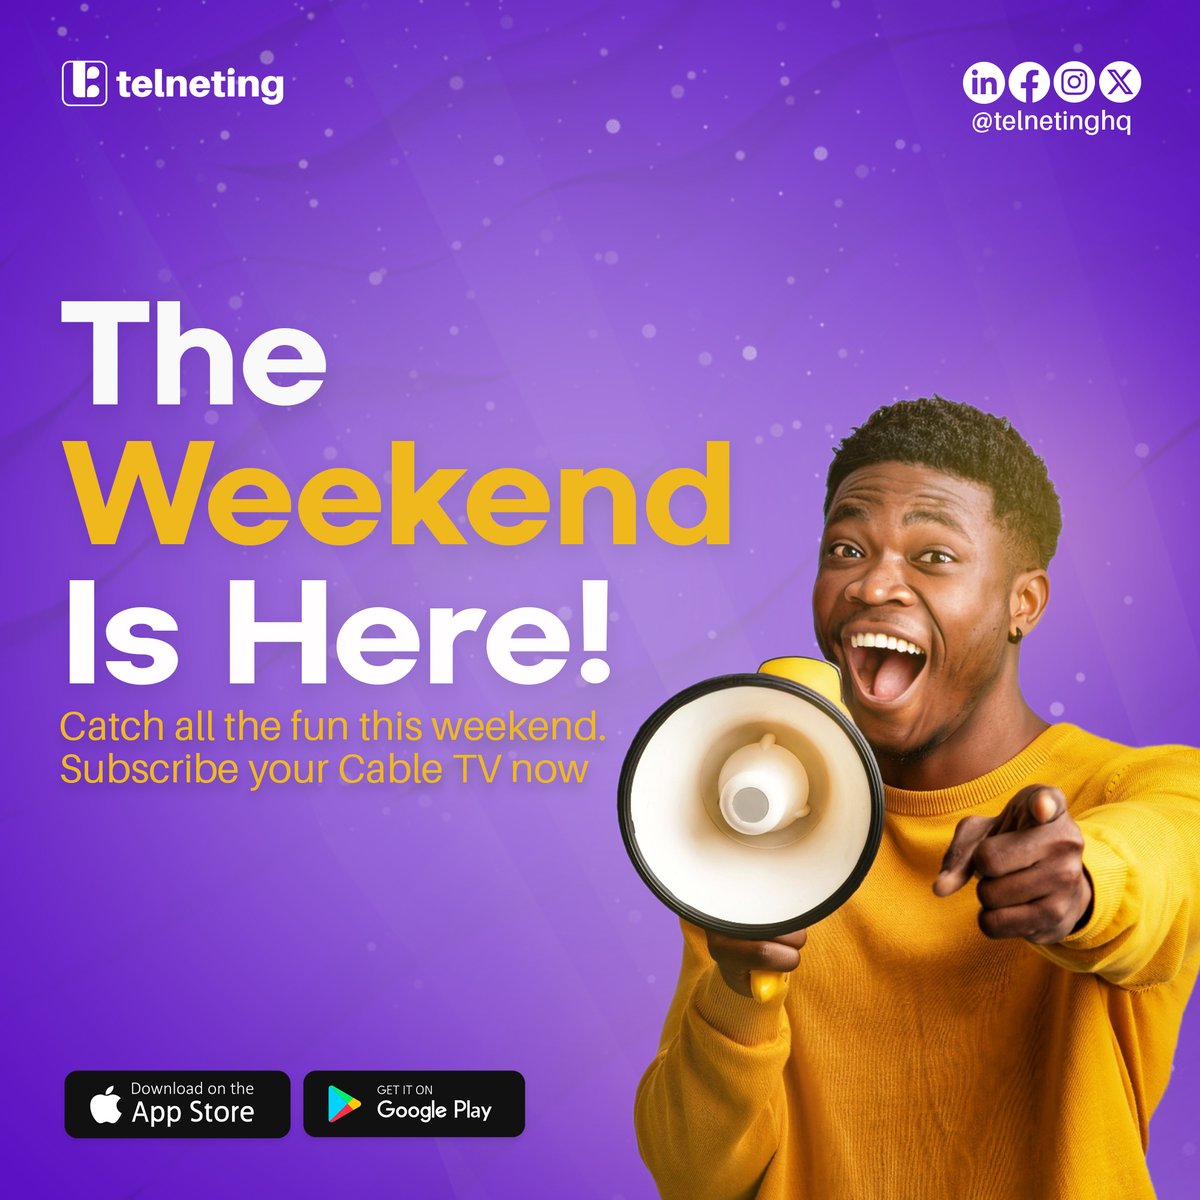 Don't miss out on any of the excitement!

Subscribe to your cable TV with the Telneting app and dive into a weekend full of entertainment.

Let the fun begin!

.
.
.

#TGIF #Telneting #CableTV #DSTV #StarTimes #GoTv.